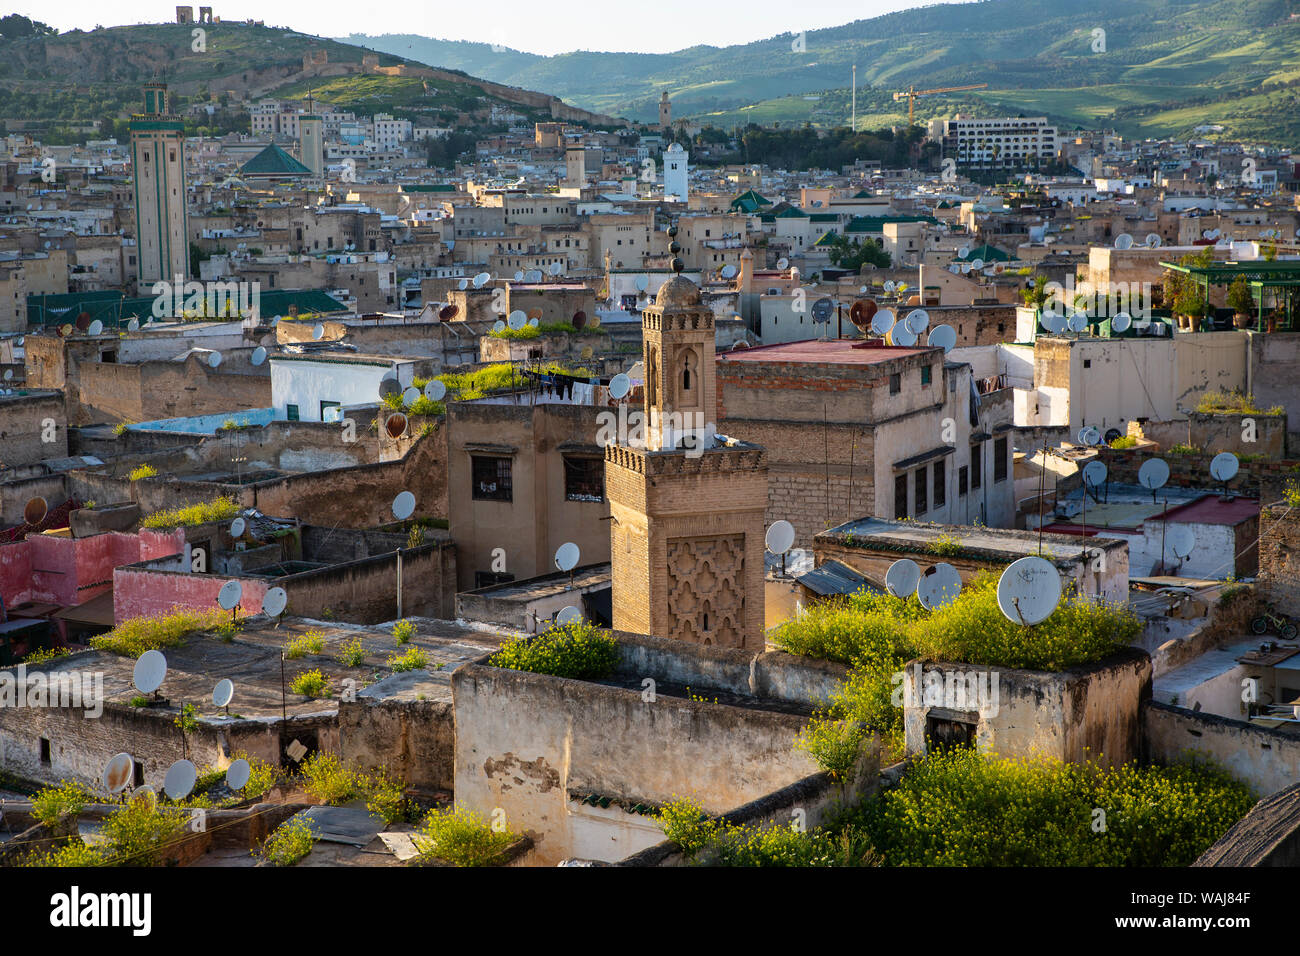 Fez, Morocco. Ancient city of Fez, its mosques and tile roofs Stock Photo